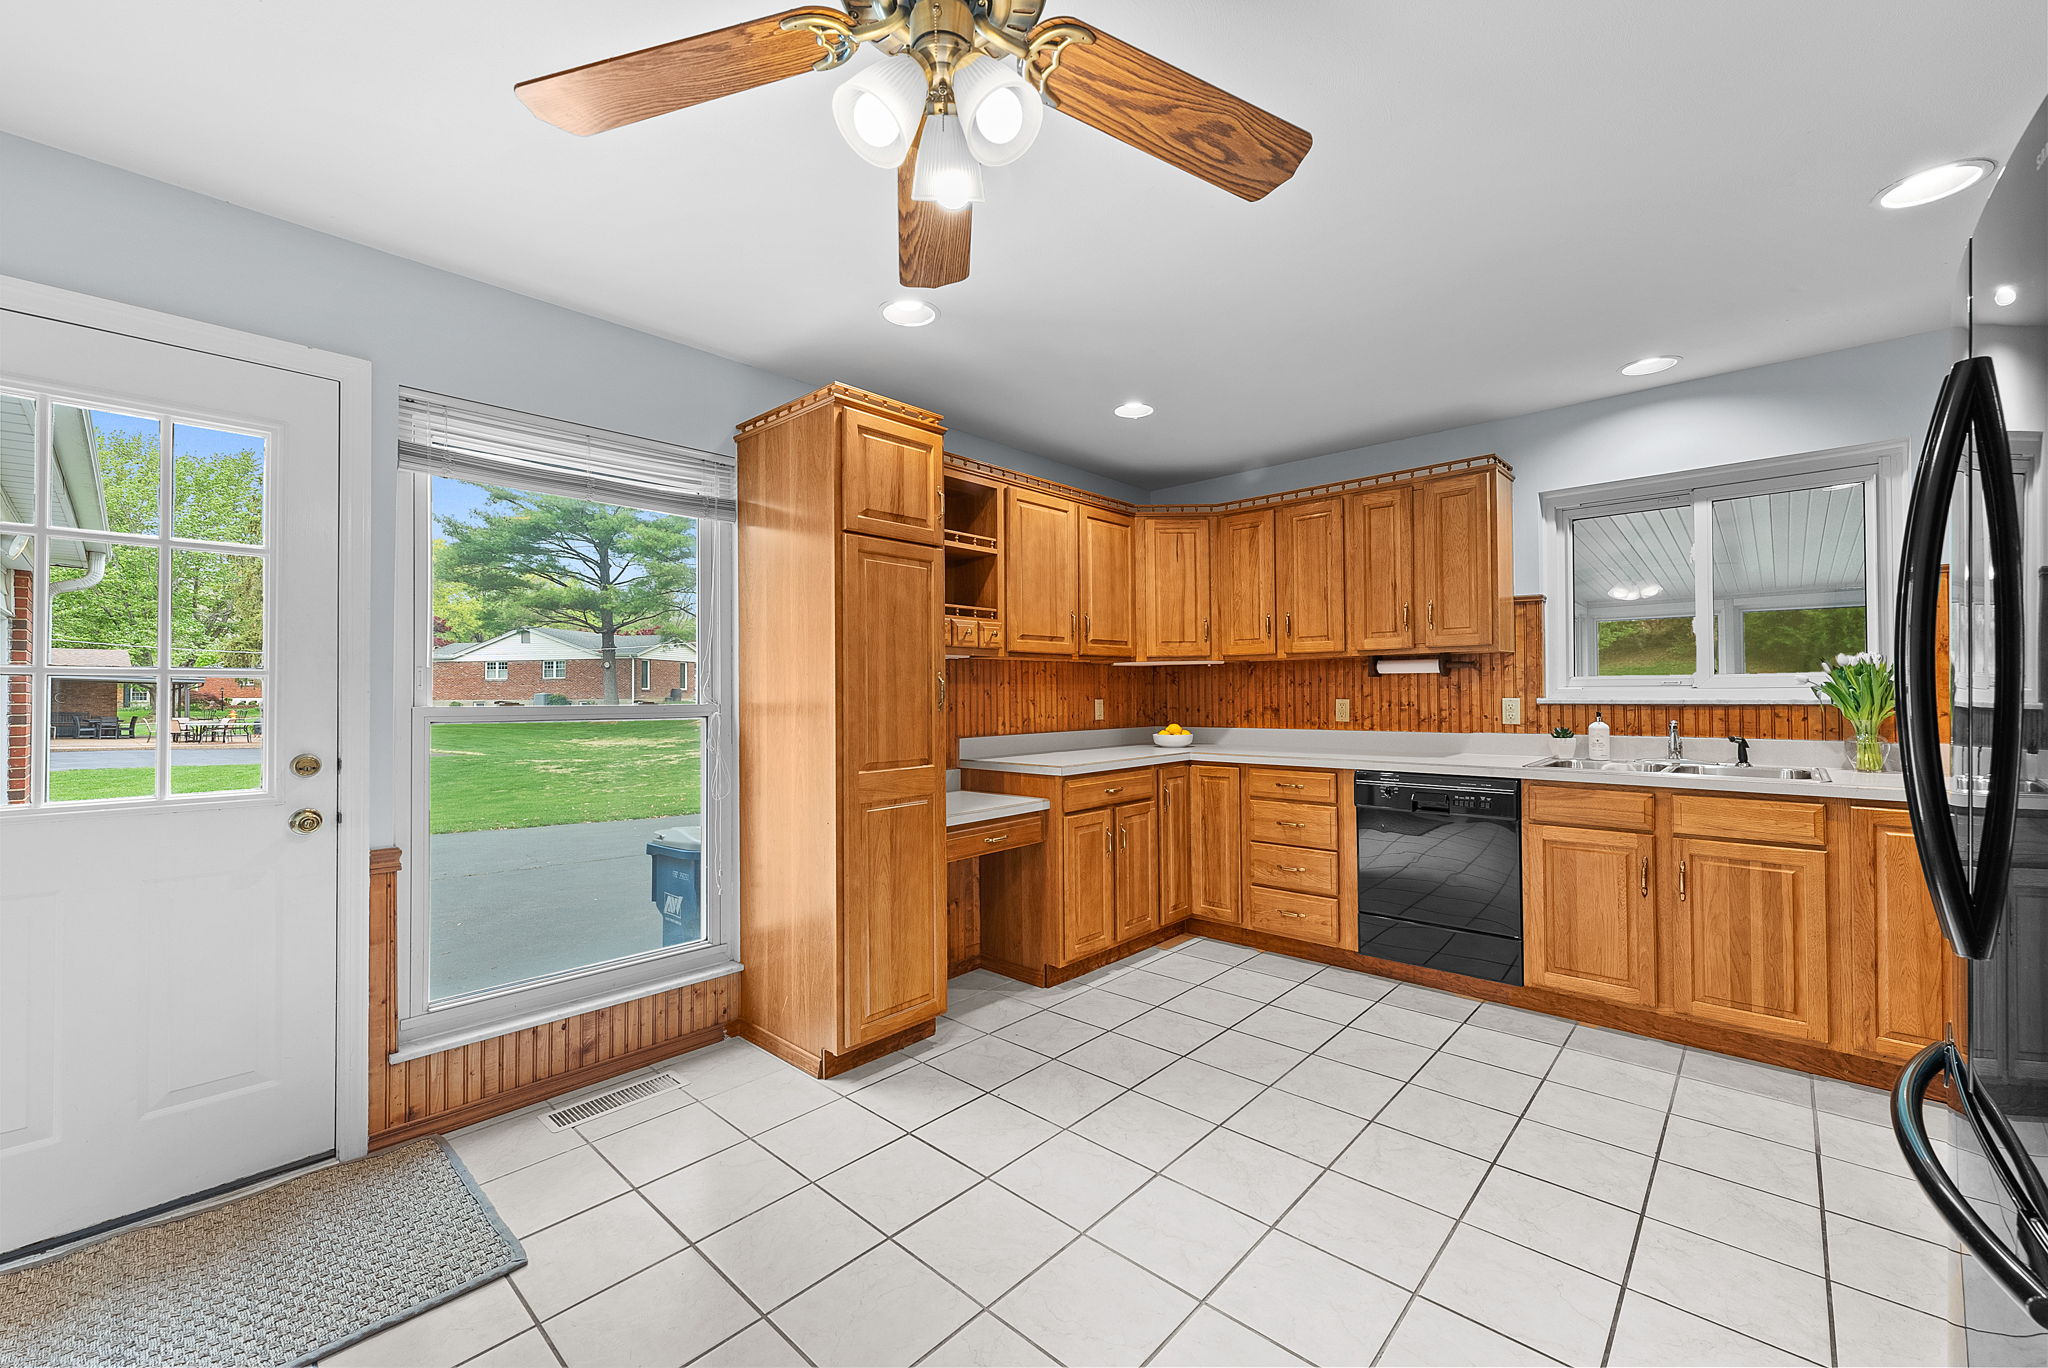 The eat-in kitchen boasts spectacular natural light and storage galore with ample cabinet space.